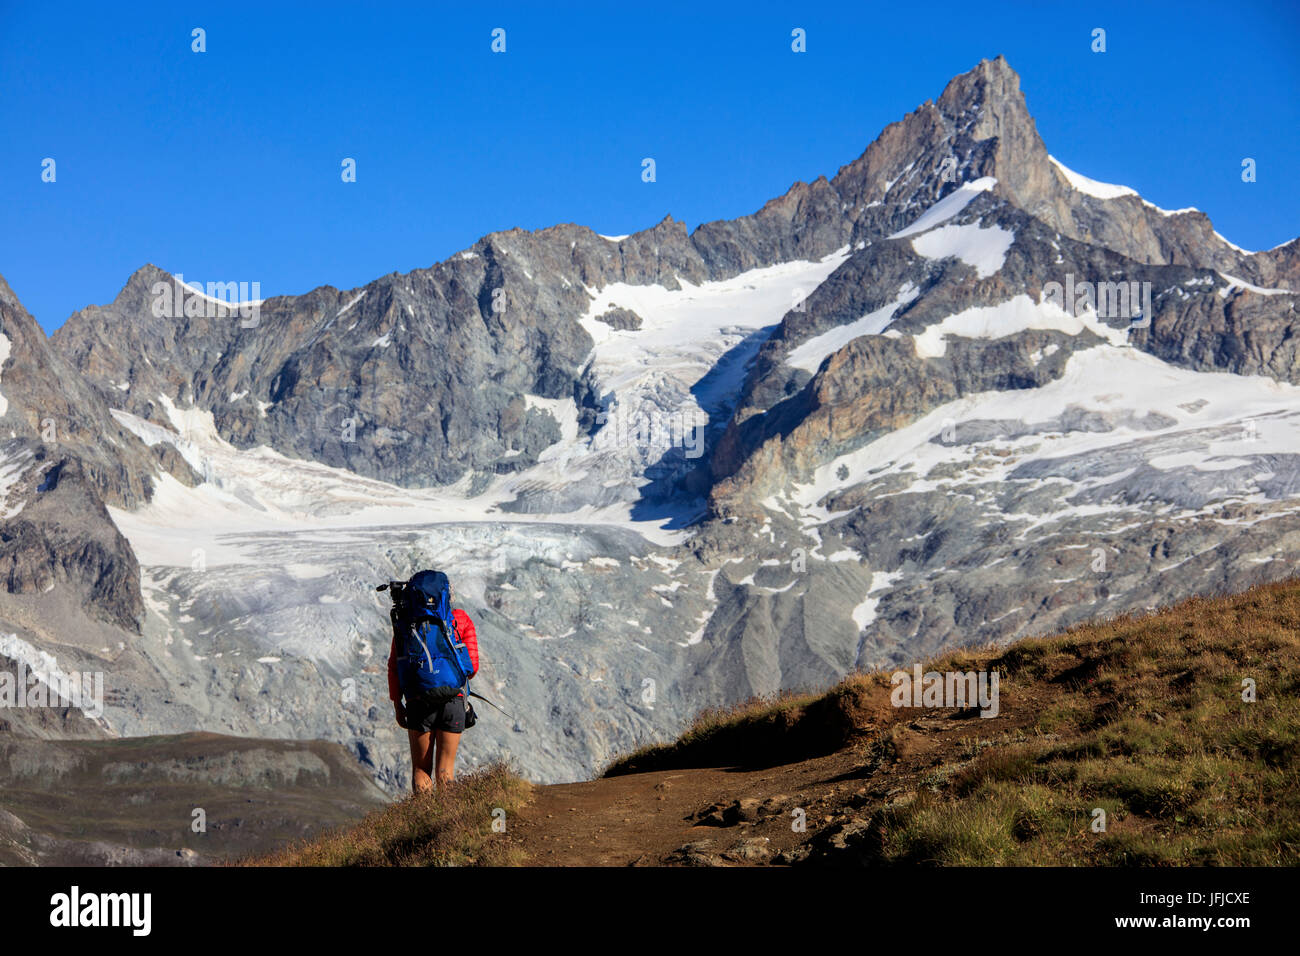 Hiker proceeds on the footpath towards the high peaks in a clear summer day Gornergrat Canton of Valais Switzerland Europe Stock Photo